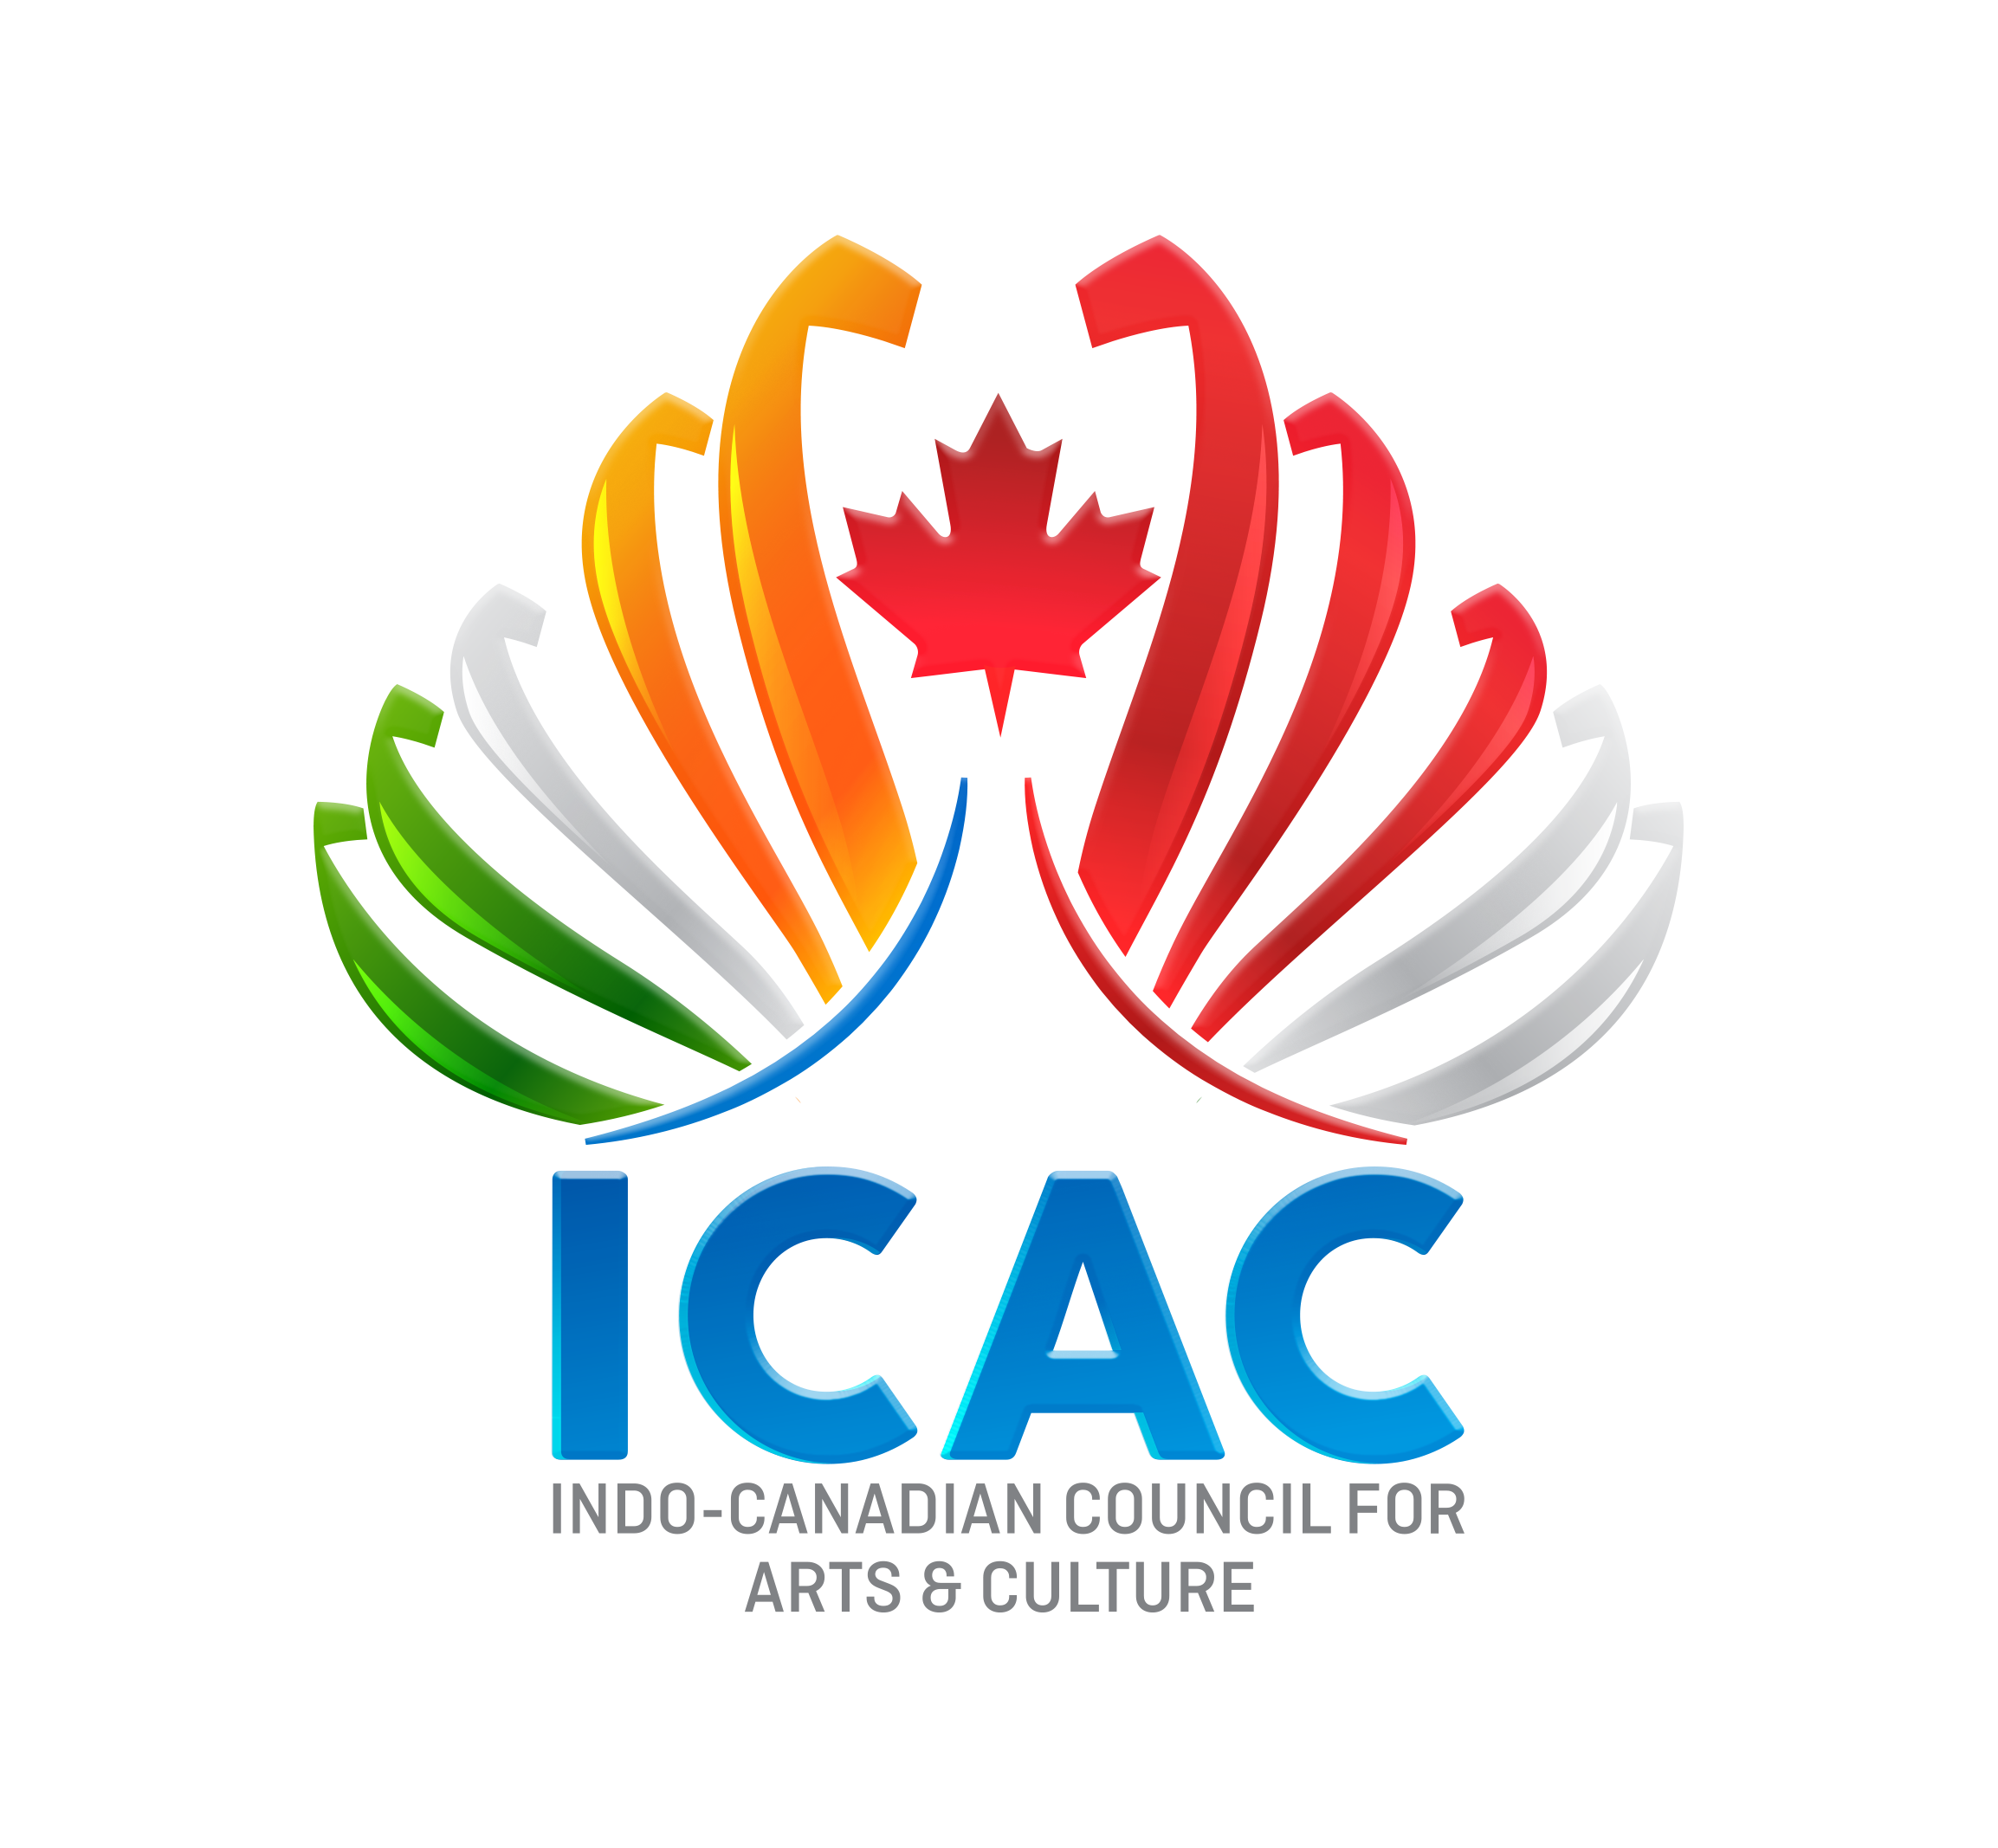 Indo-Canadian Council for Arts & Culture